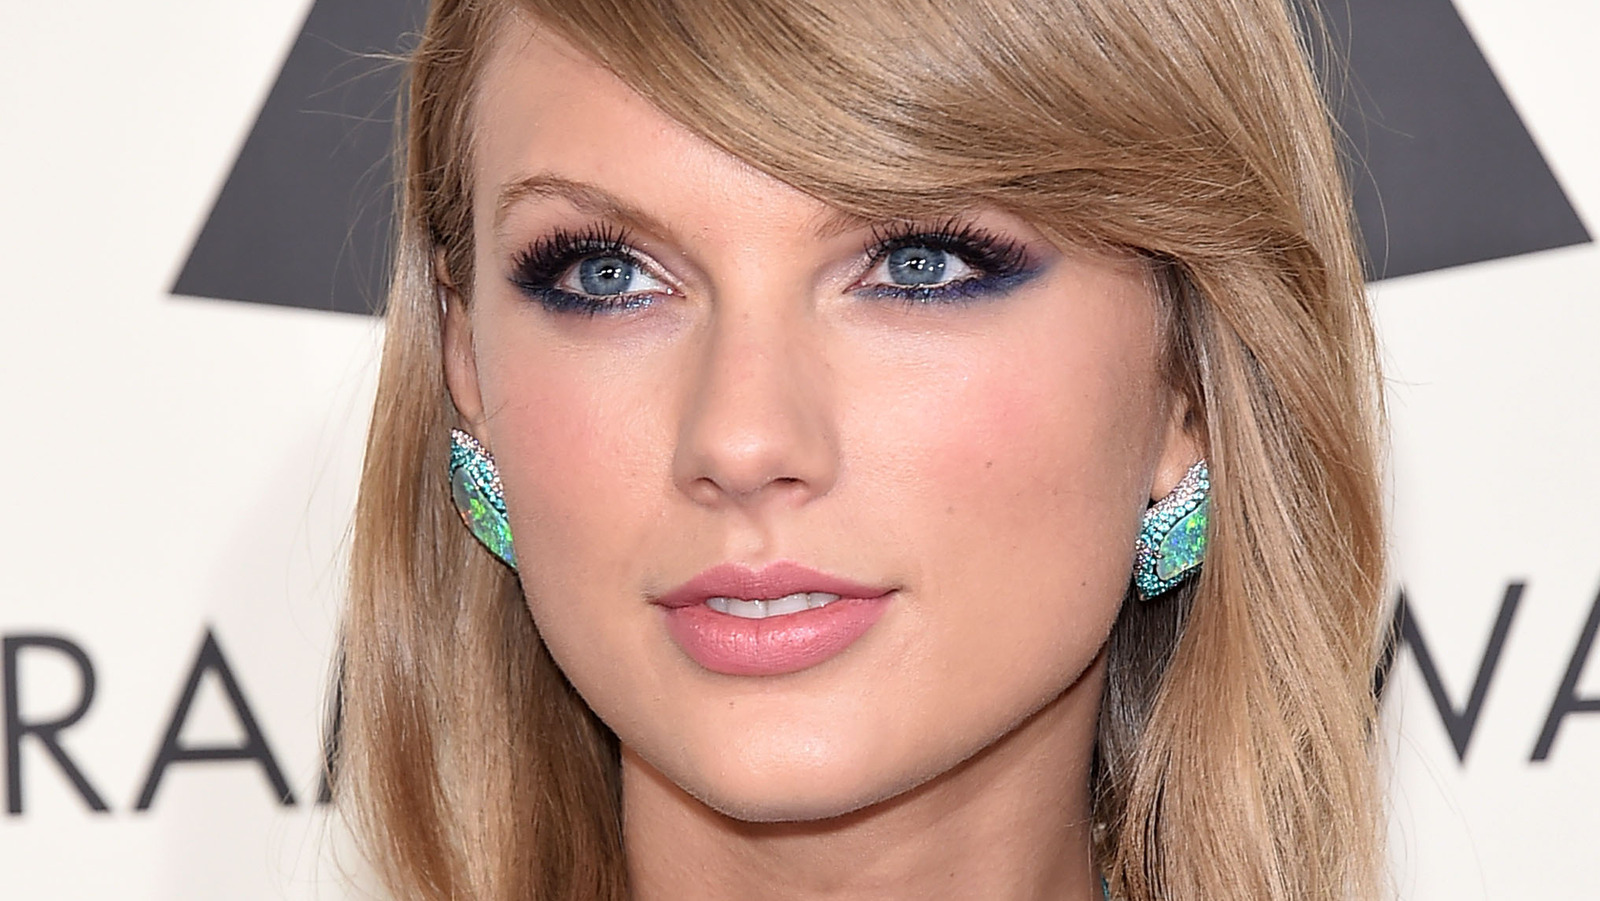 What's The Real Meaning Of Question...? By Taylor Swift? Here's What We